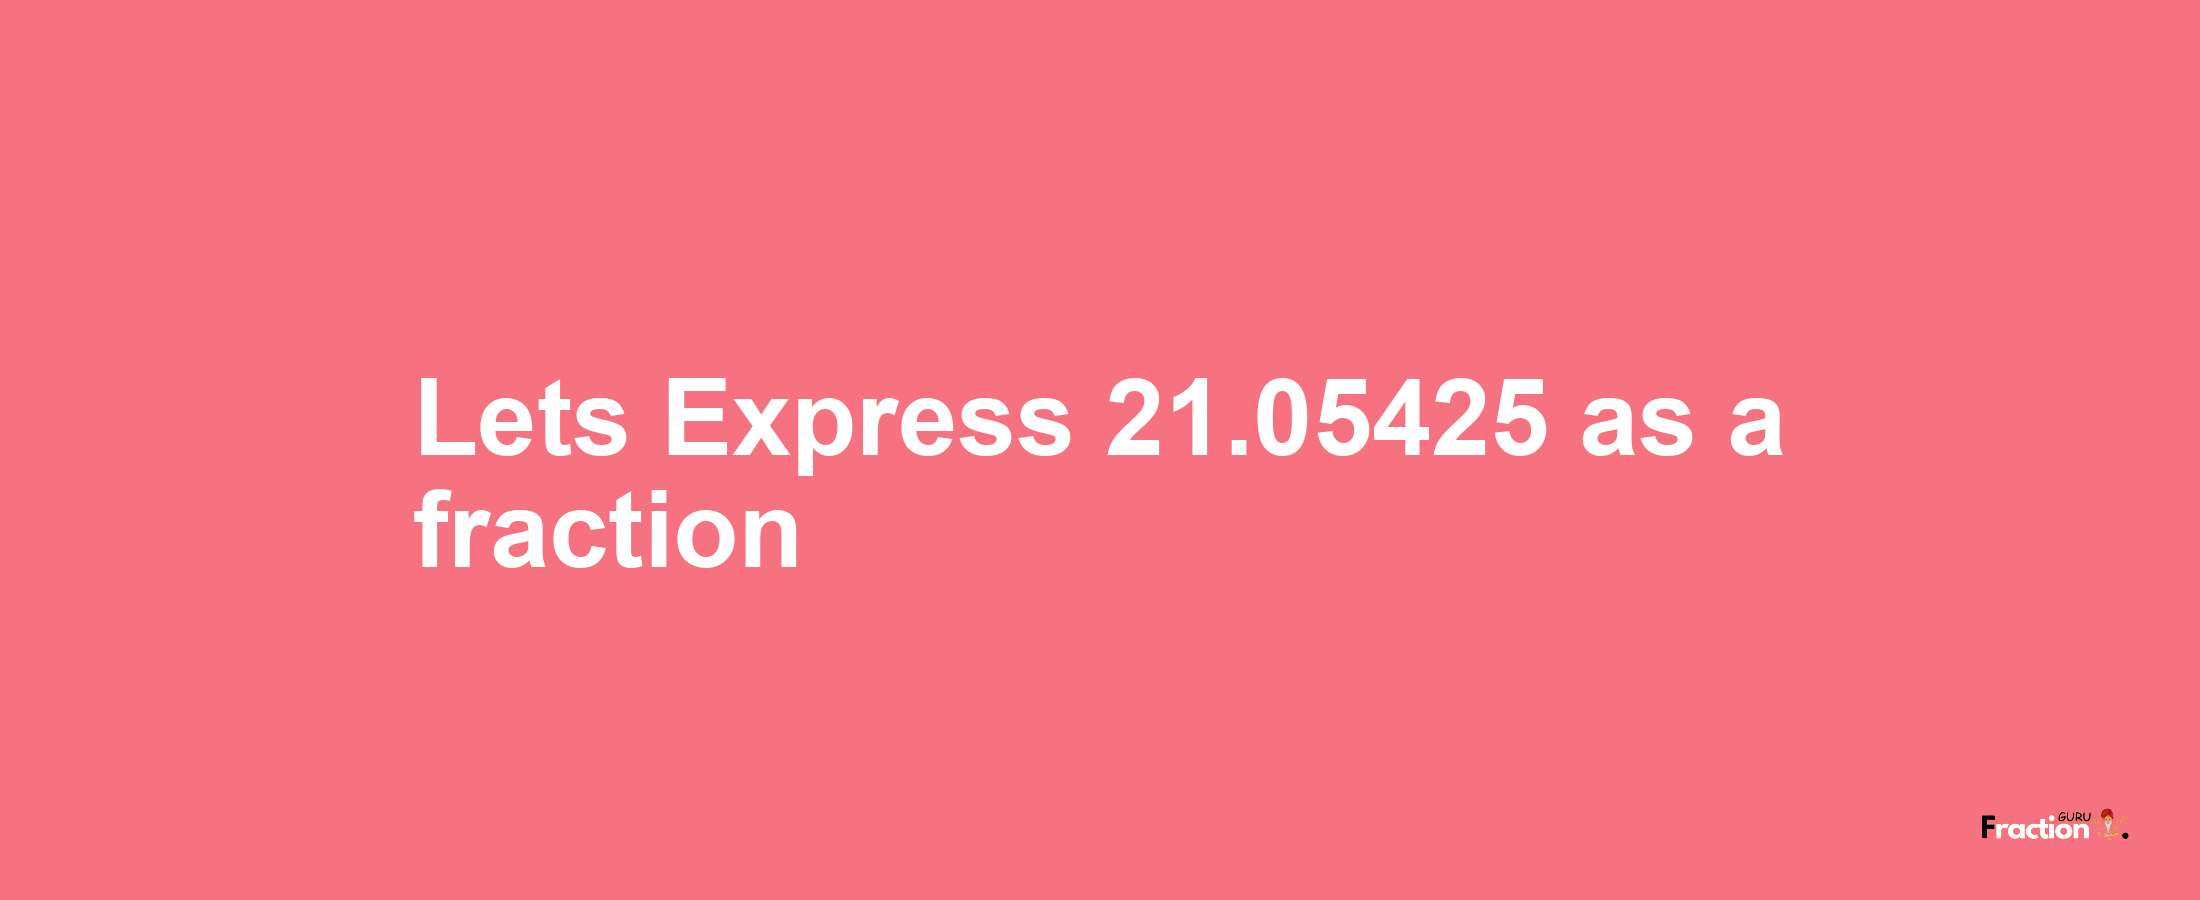 Lets Express 21.05425 as afraction